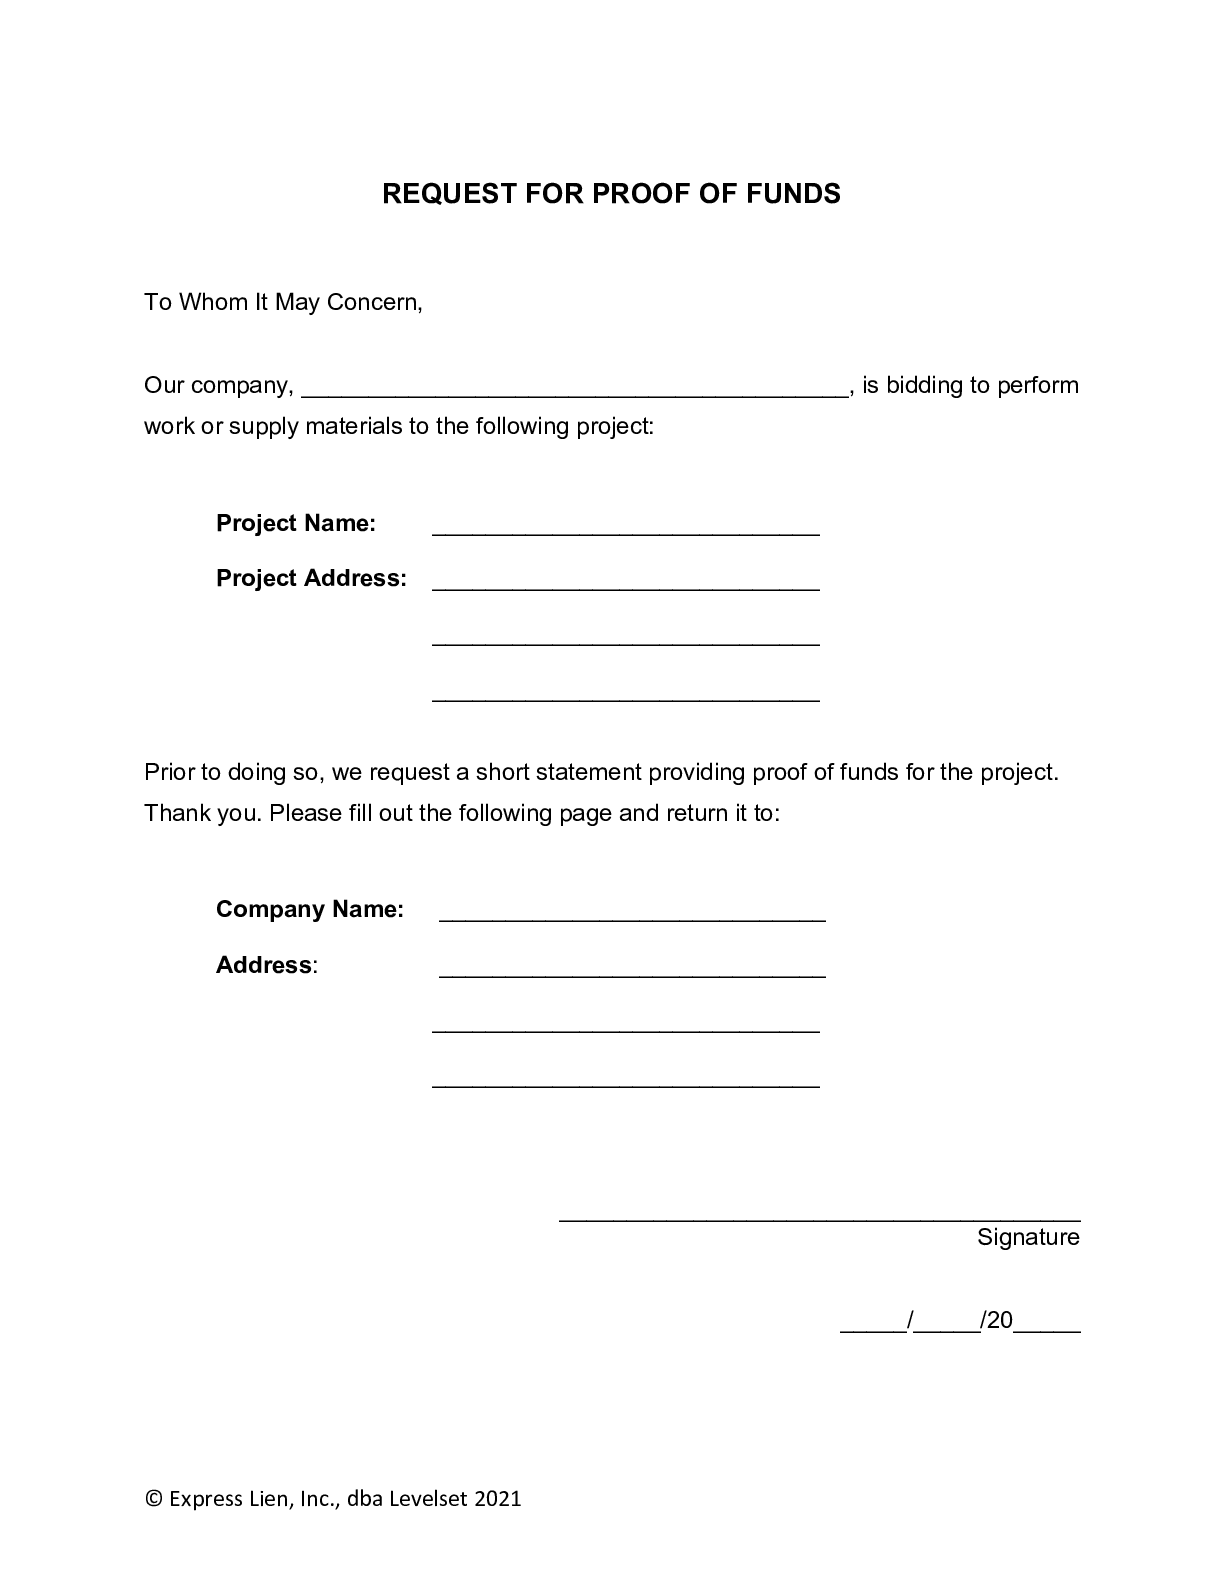 Request for Proof of Funding Letter [Free Template] - free from